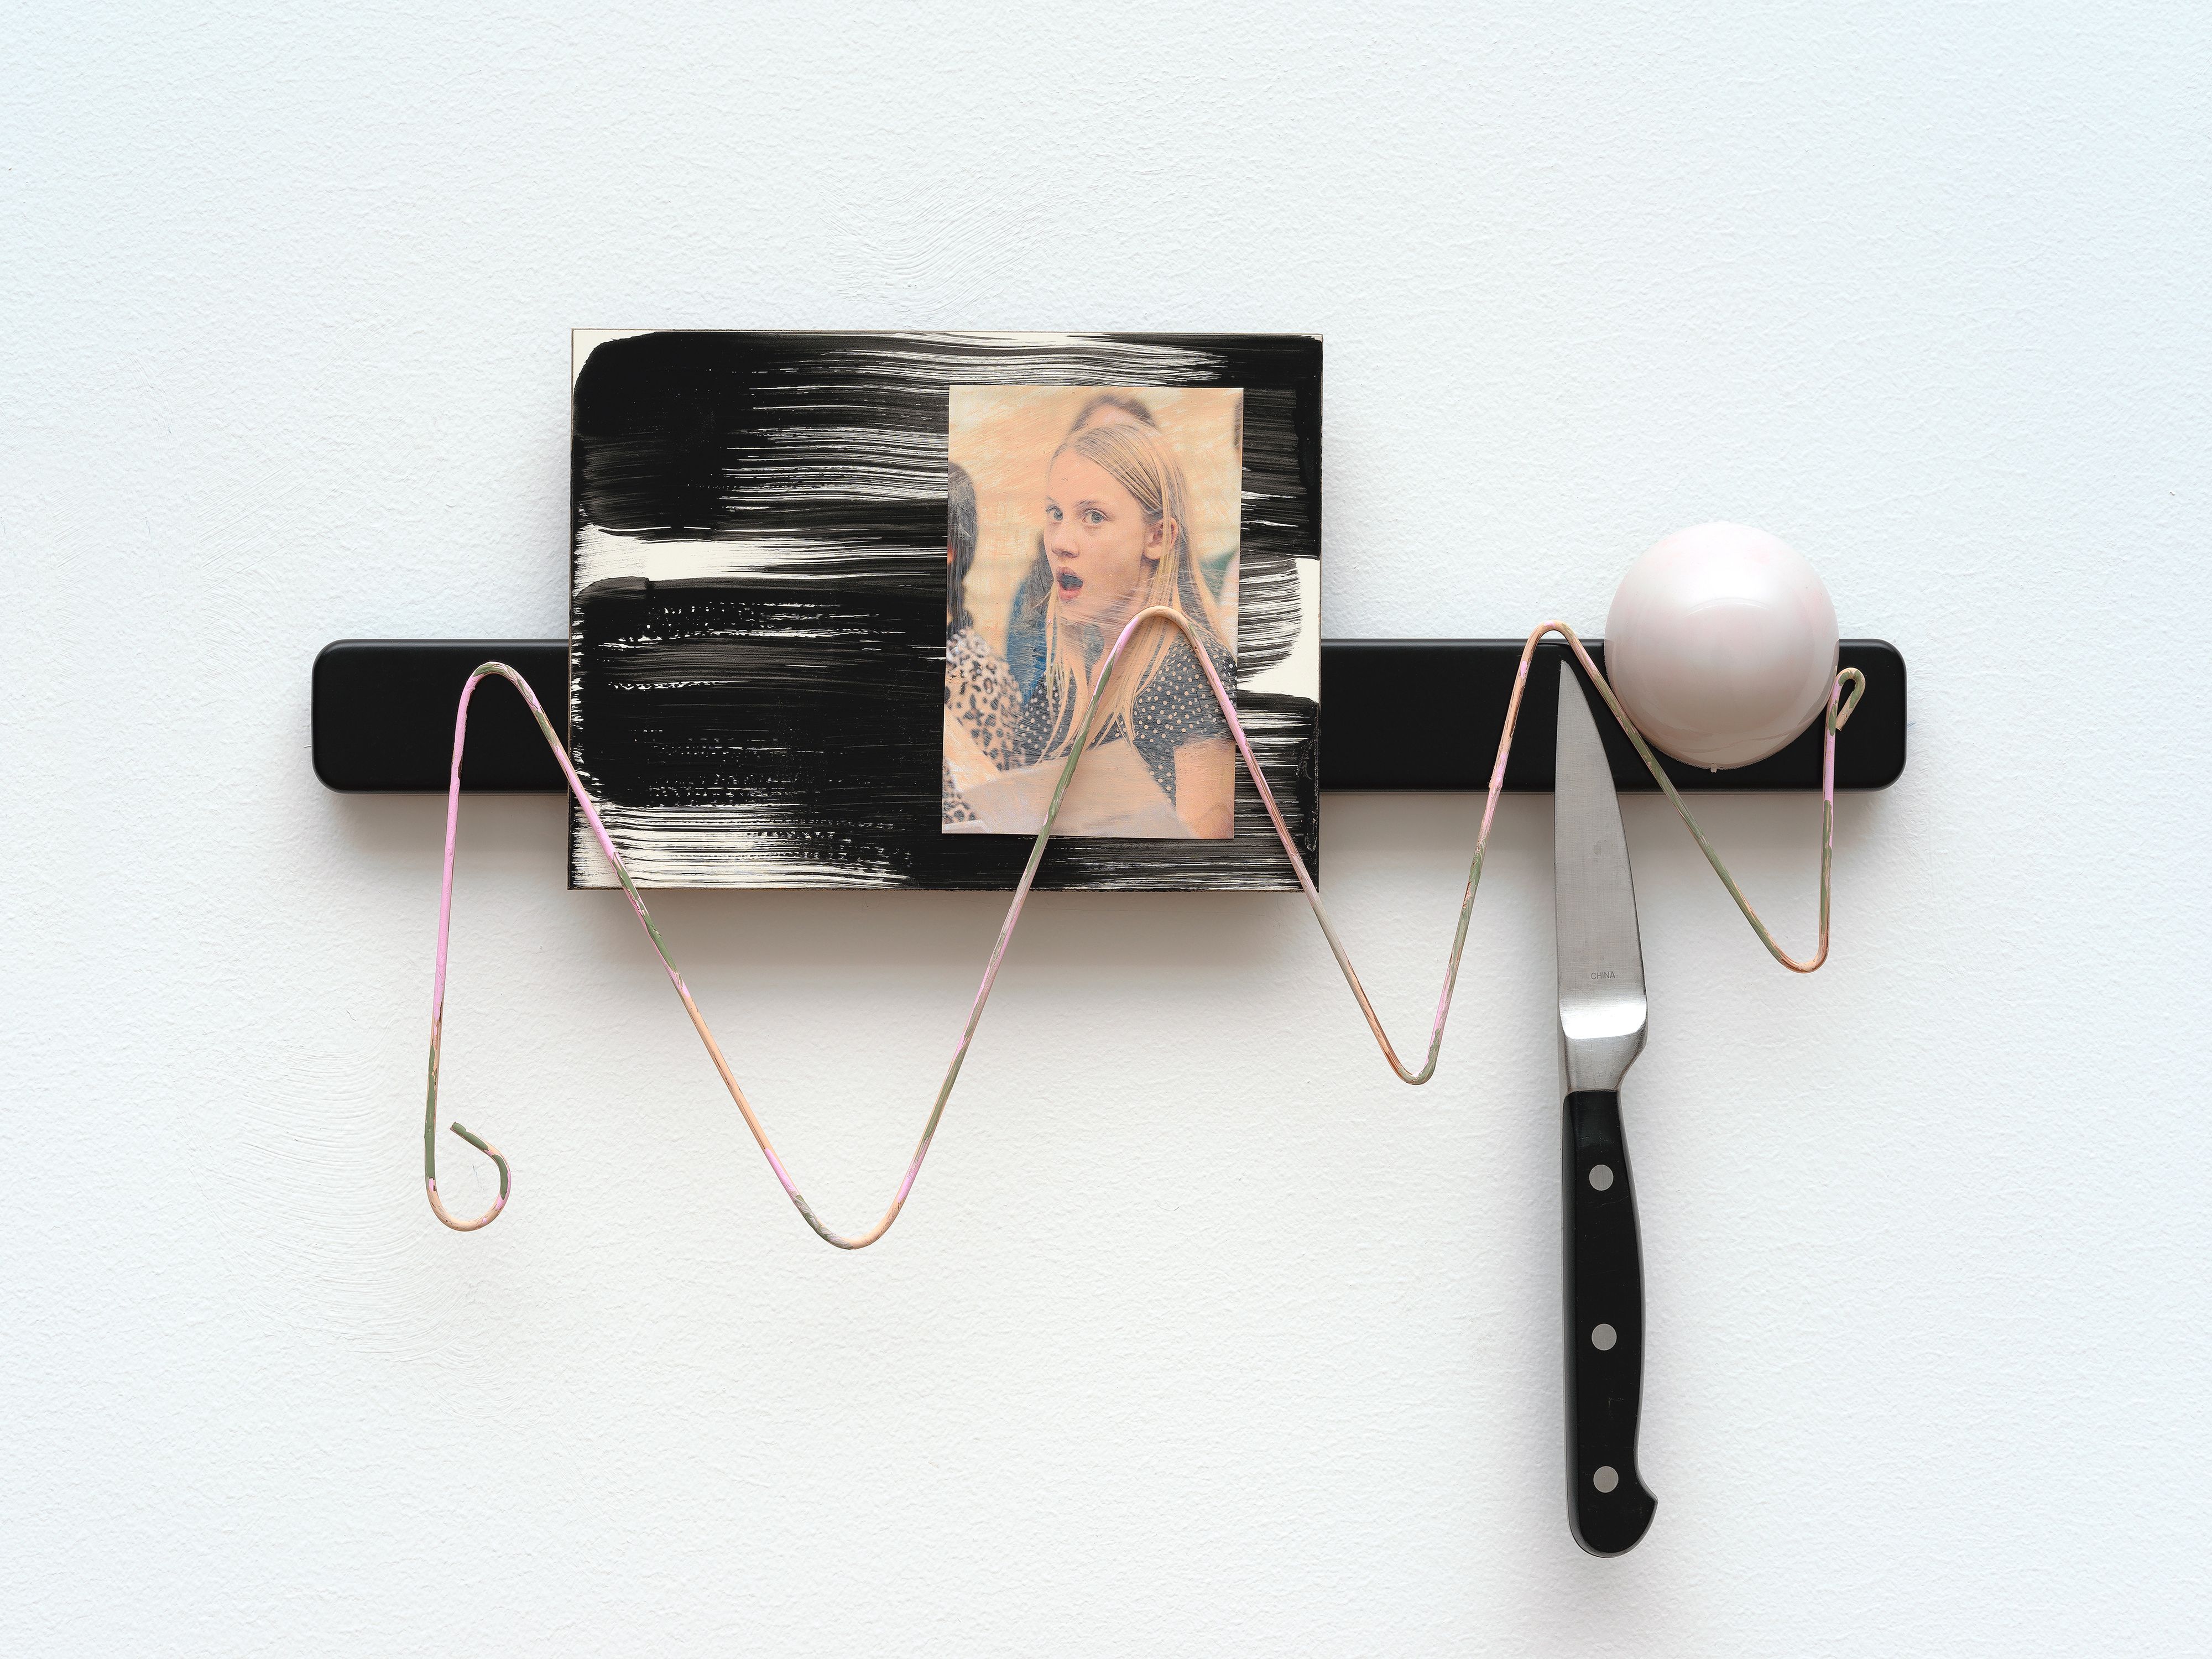 Sara Magenheimer, Paloma, 2016, knife rack, painted steel wire, collaged pigment print on painted clay board, knife, rubber door stop 10 1/2 x 14 1/2 in. (26.67 x 36.83 cm)